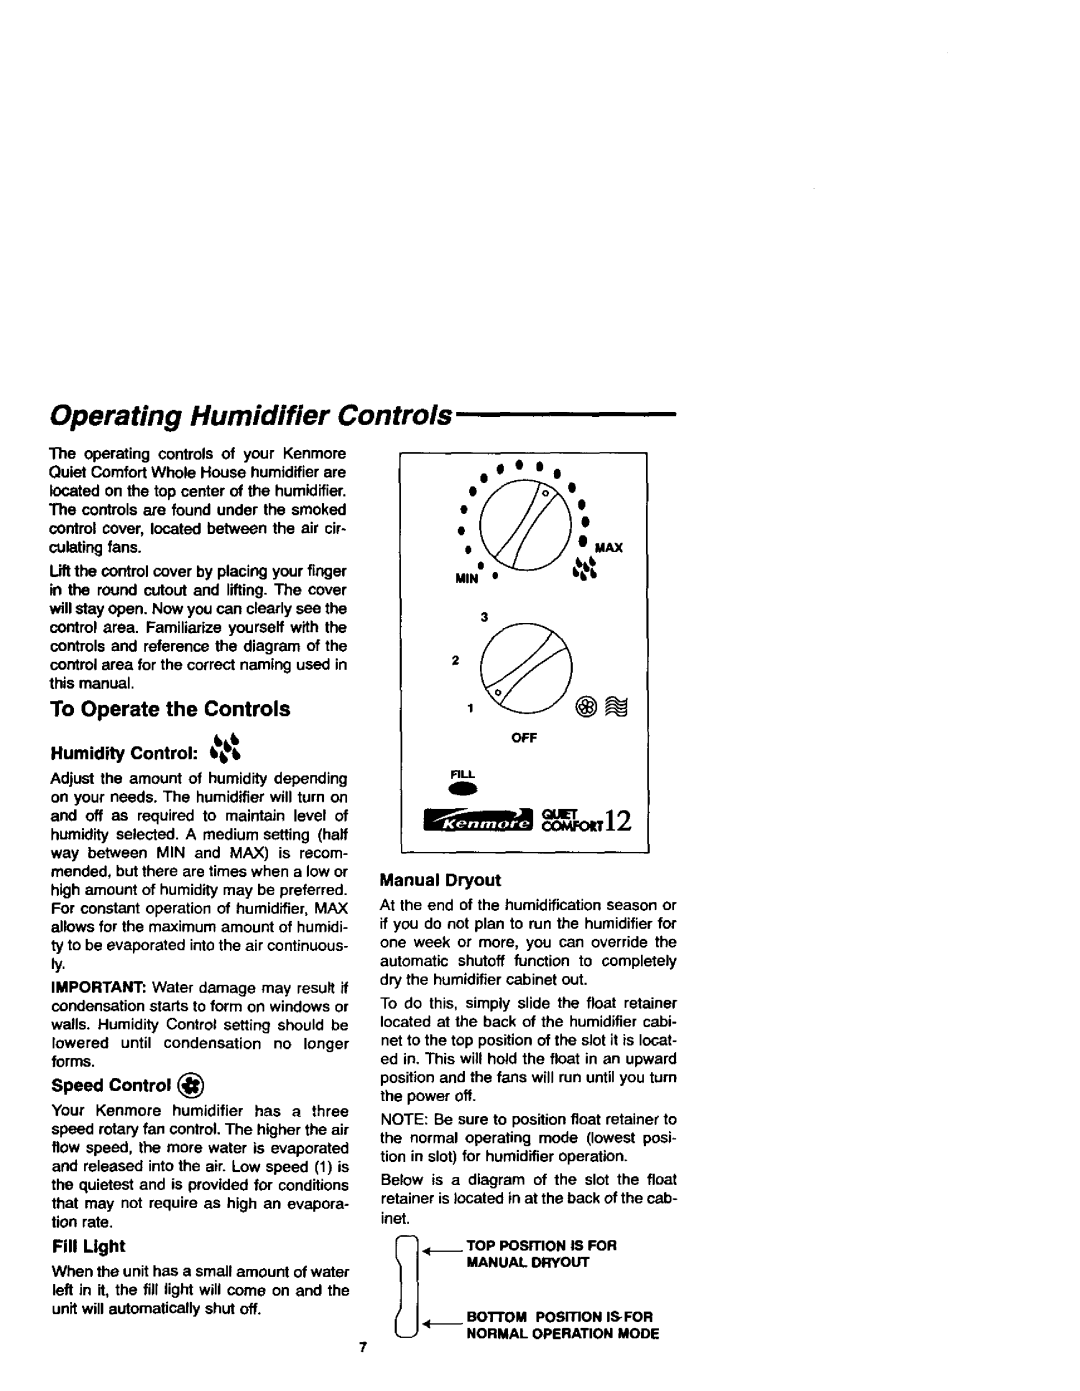 Sears 758.144131 owner manual Operating Humidifier Controls, To Operate the Controls 